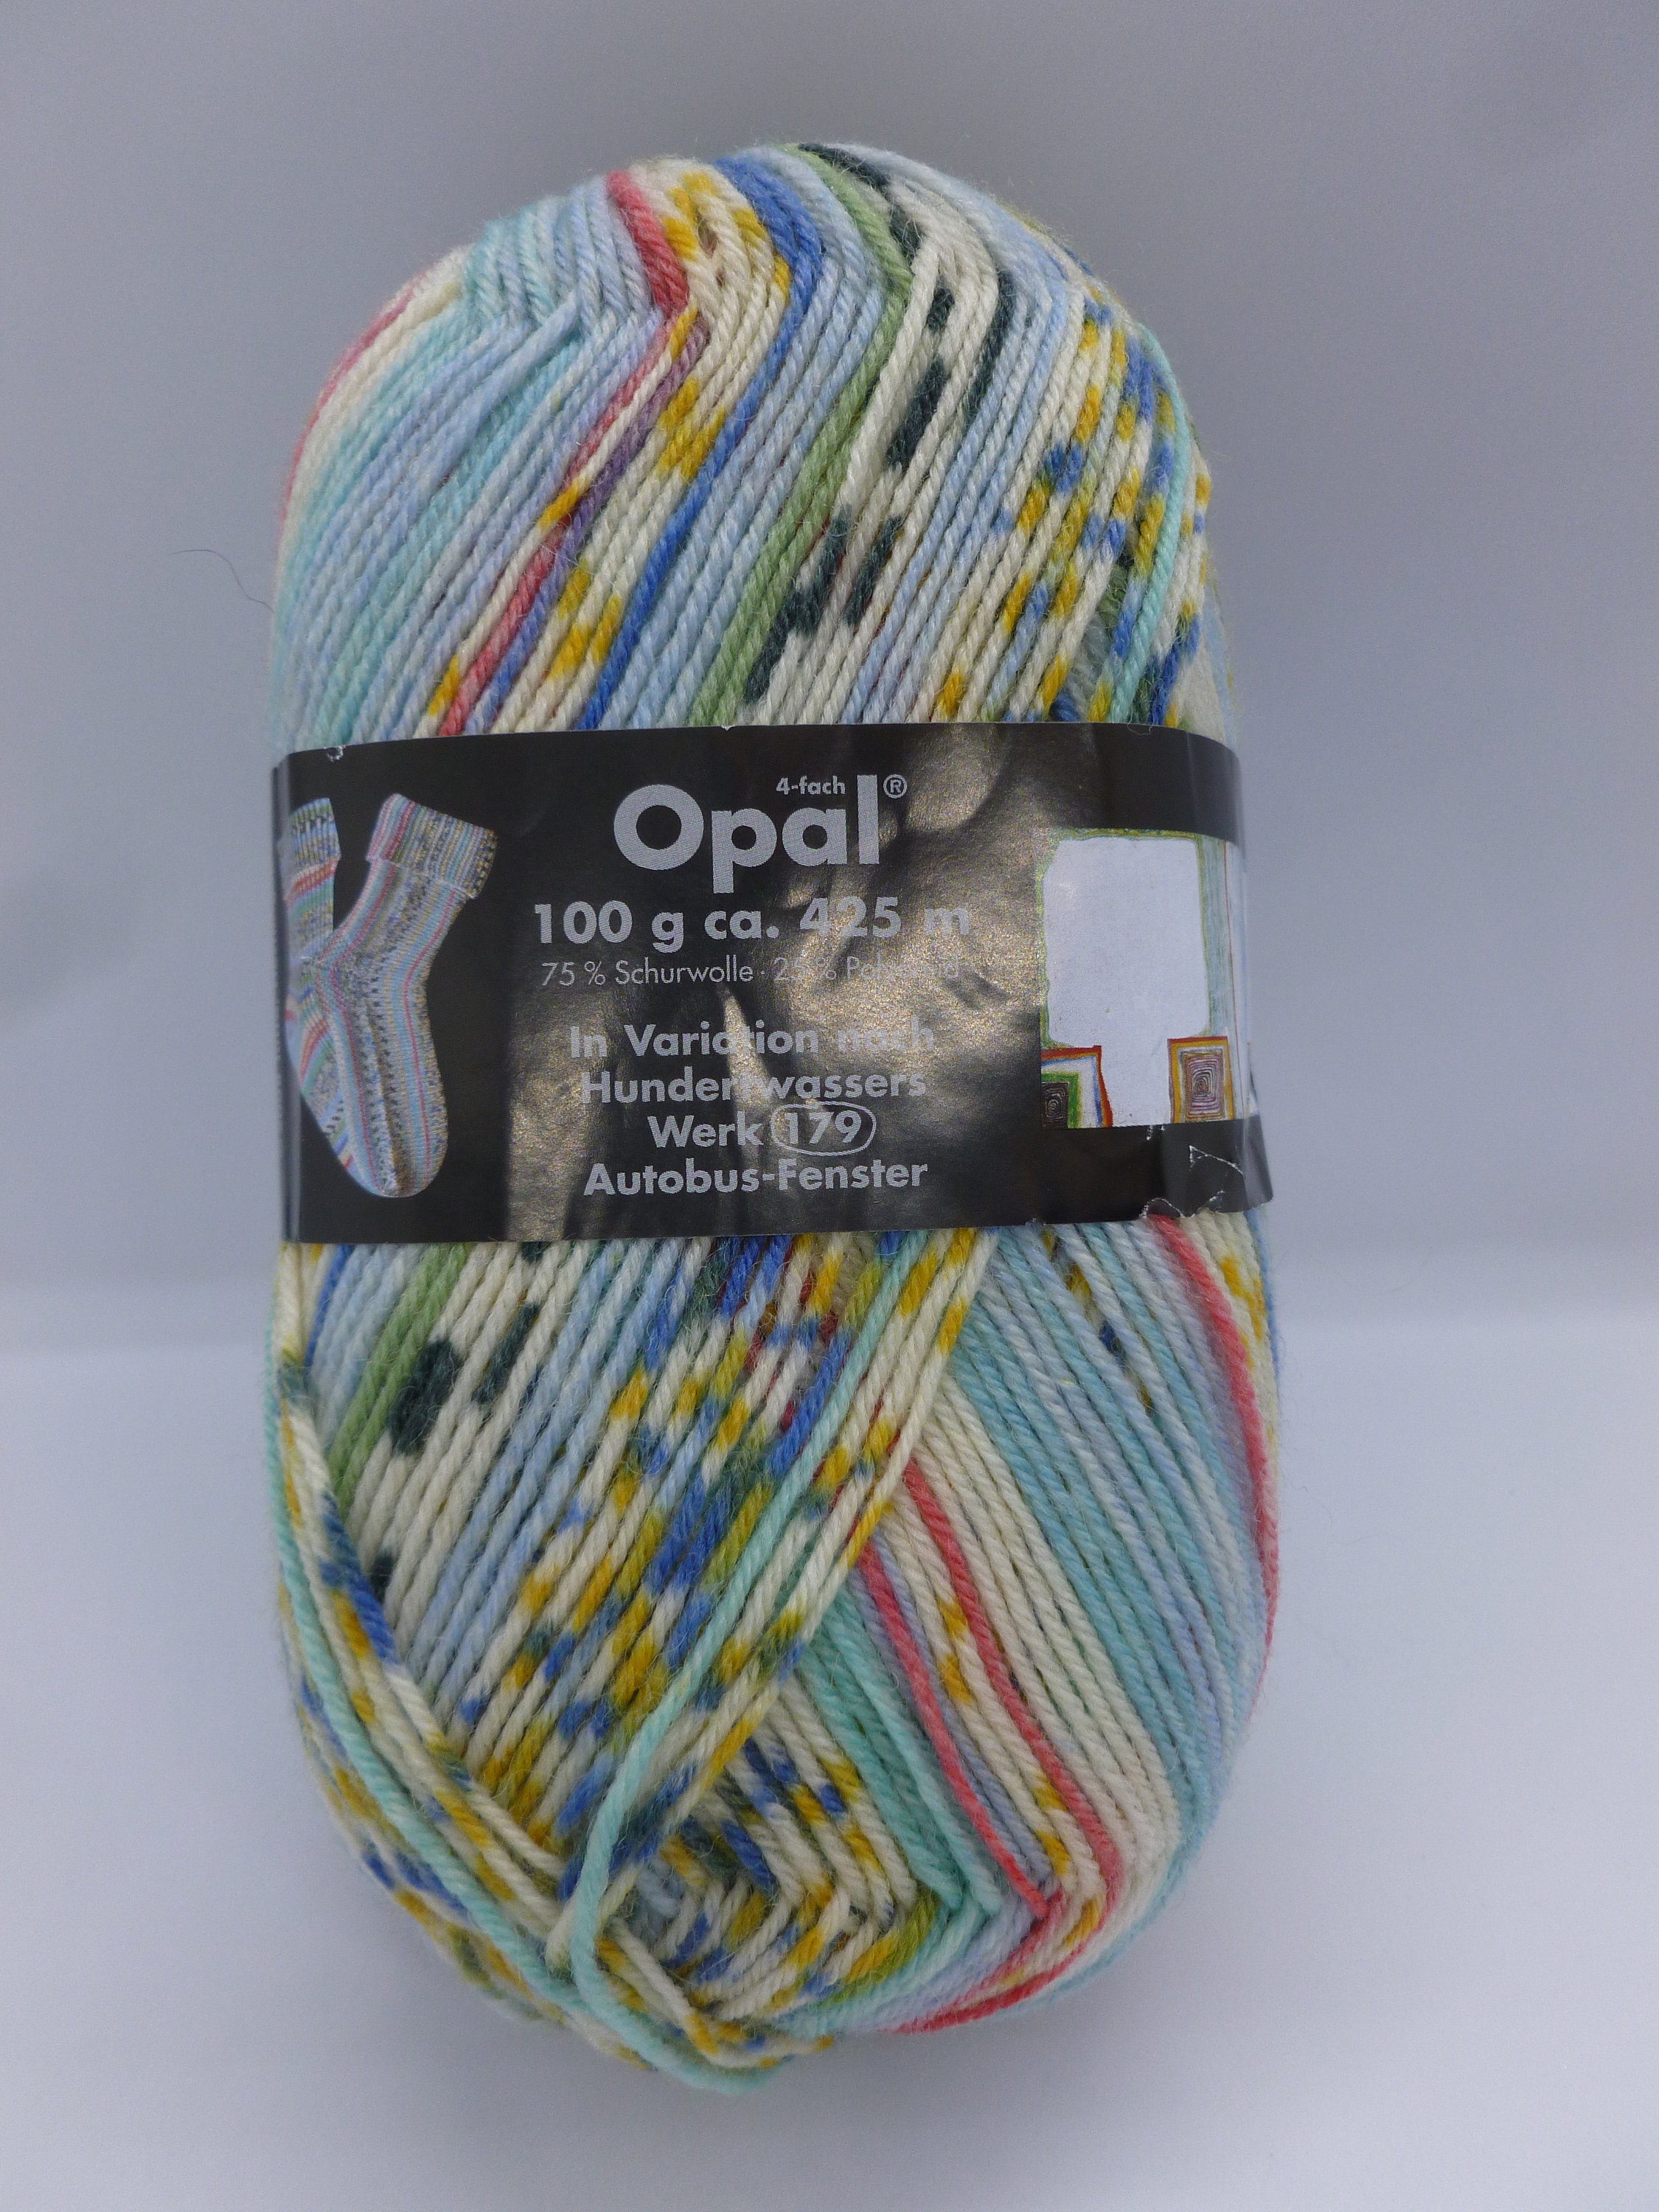 Opal 100g warm 425 m made in Germany 75 % wool colourful choice of colours Opal Sock Yarn superwash at 40